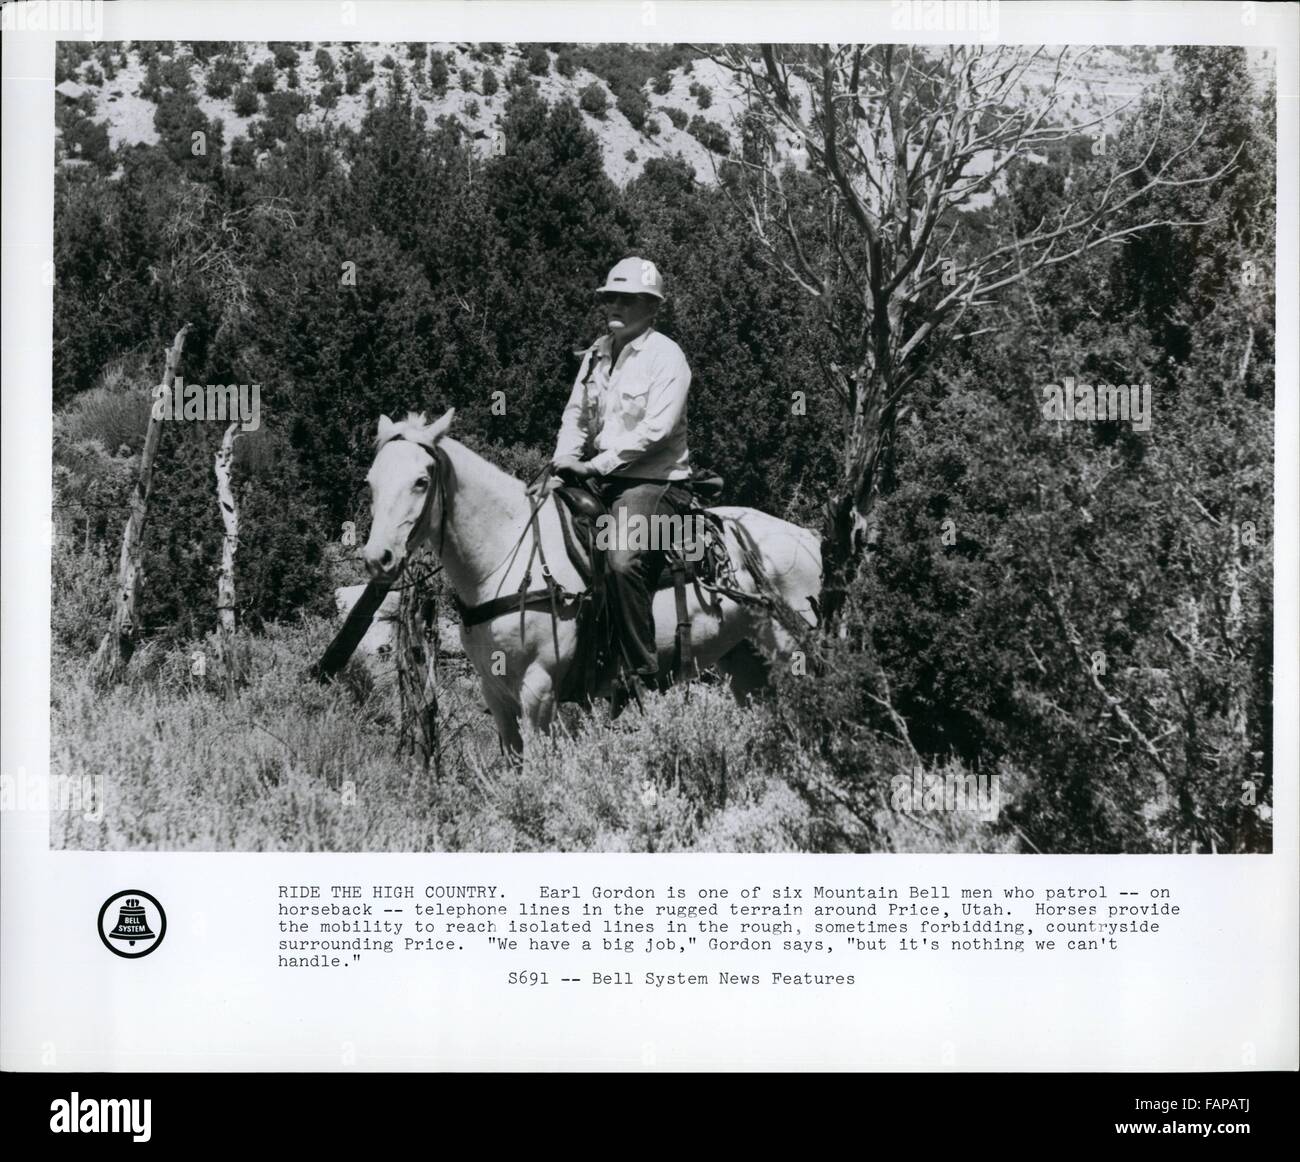 1962 - Ride the High Country Earl Gordon is one of six Mountain Bell men who patrol on horseback, telephone lines in the rugged terrain around Price, Utah. Horses provide the mobility to reach isolated lines in the rough, sometimes forbidding, countryside surrounding Price. We have a big job, Gordon says, but it s nothing we can t handle. © Keystone Pictures USA/ZUMAPRESS.com/Alamy Live News Stock Photo